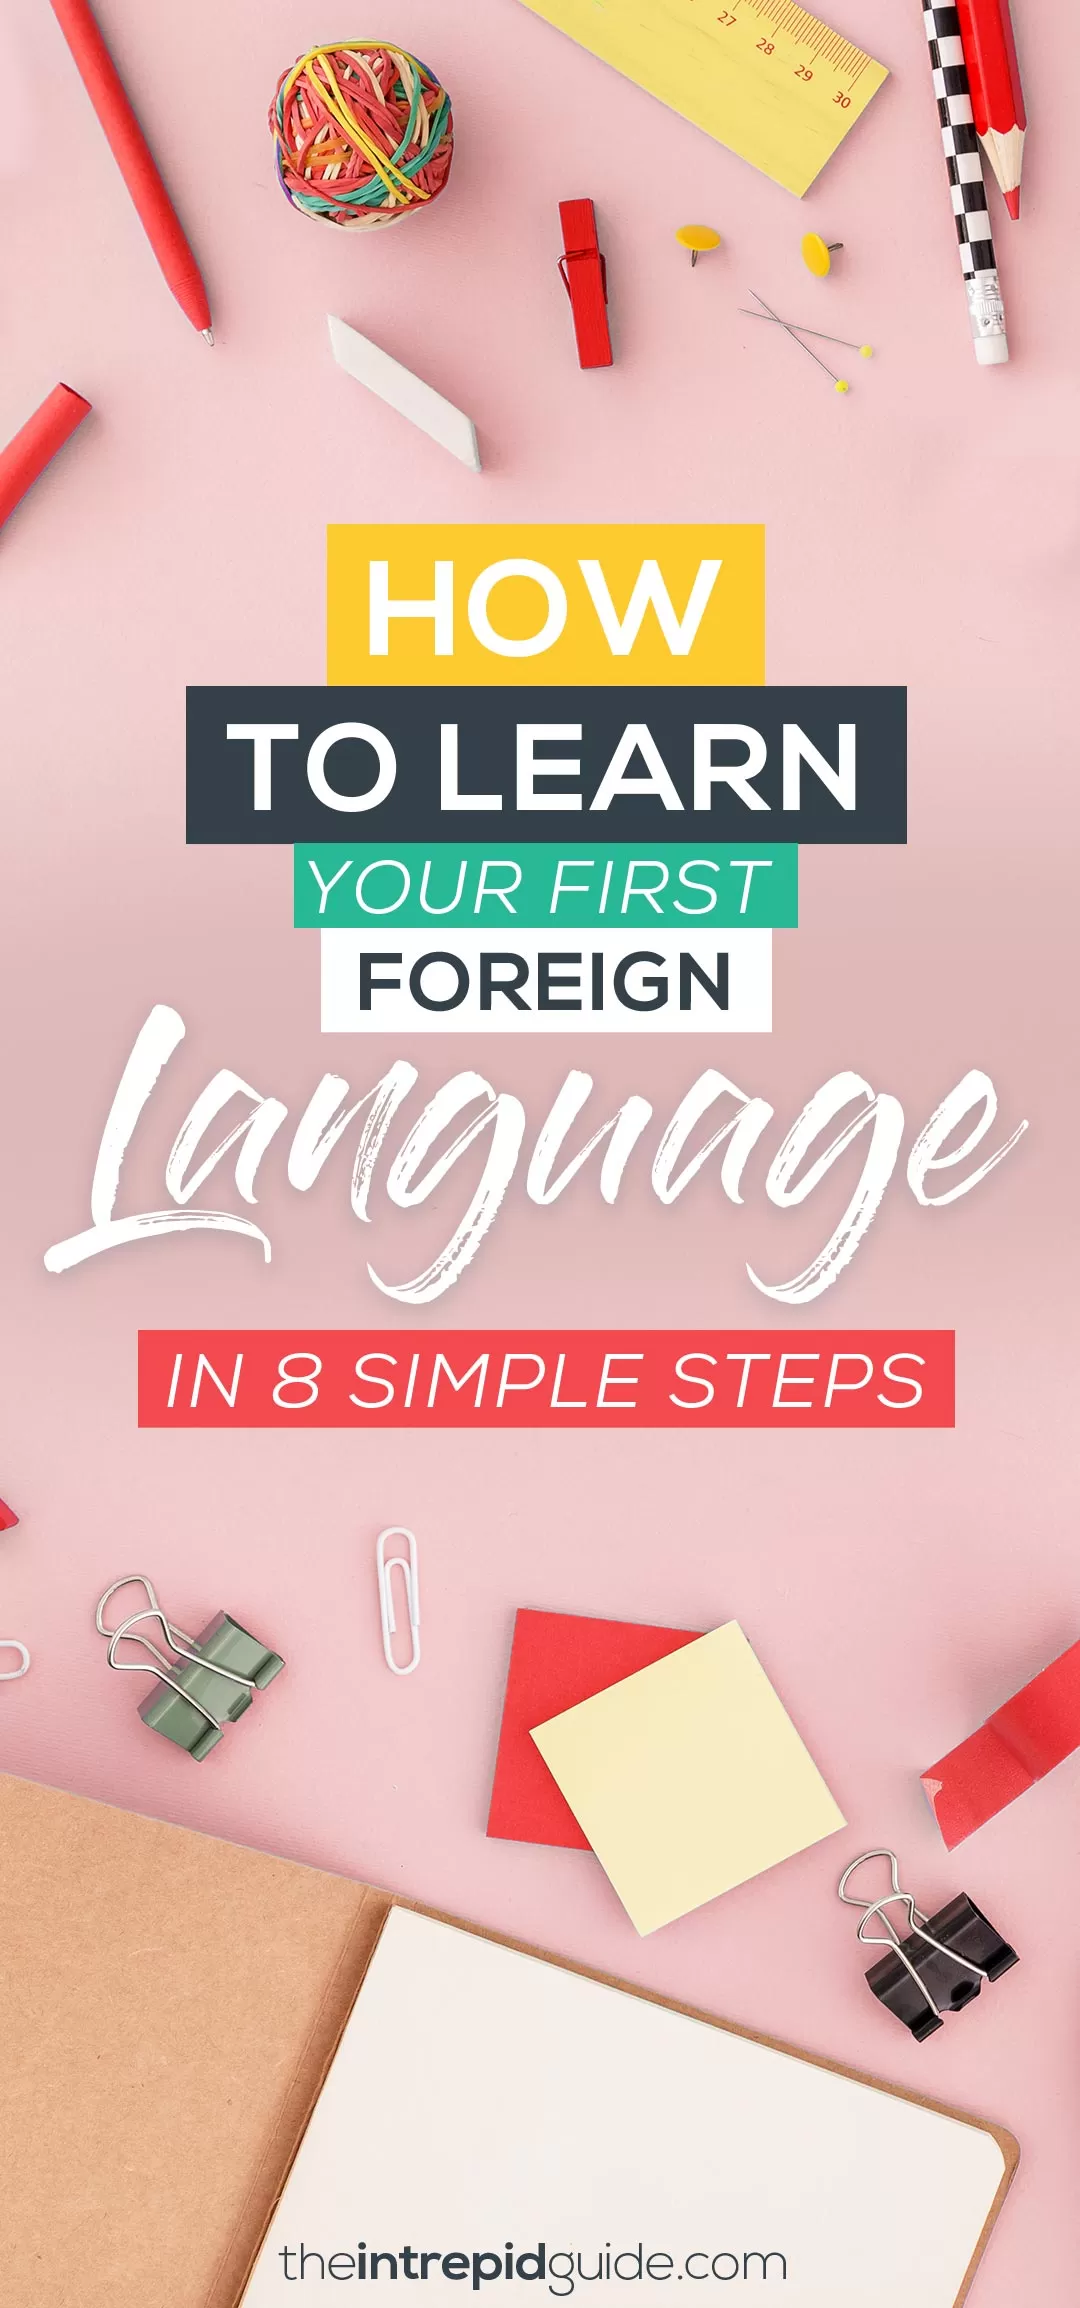 How to Learn a Foreign Language in 8 Simple Steps - A Beginner's Guide